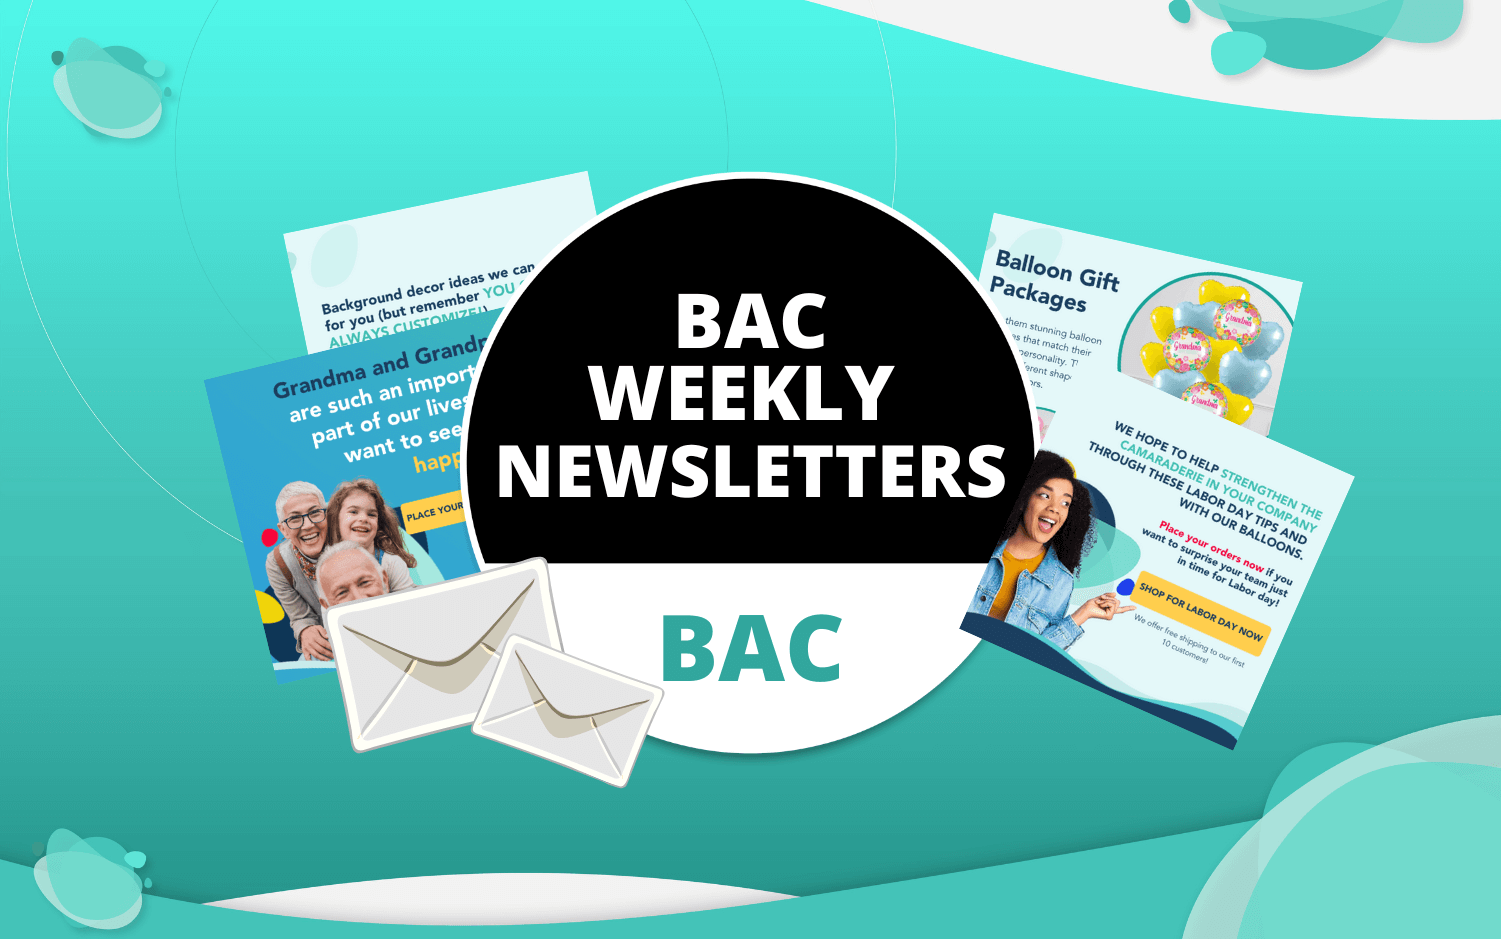 BAC Weekly newsletters